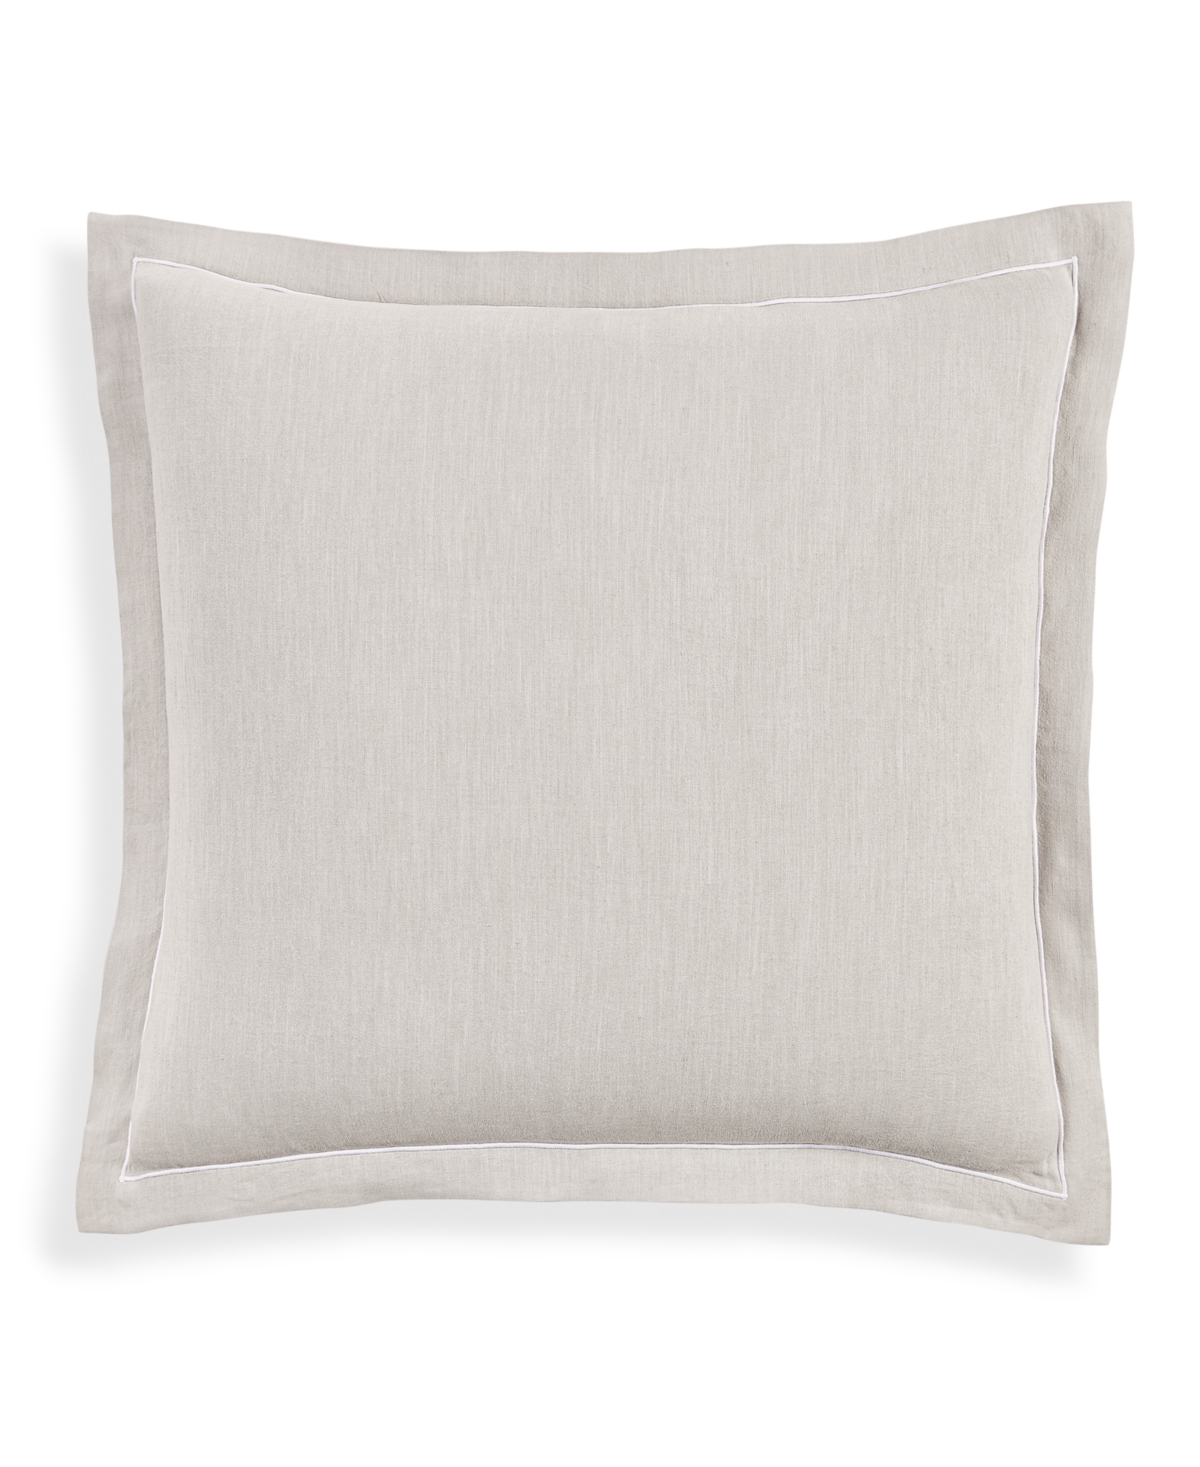 Closeout! Hotel Collection Linen/Modal Blend Sham, European, Created for Macy's - Grey